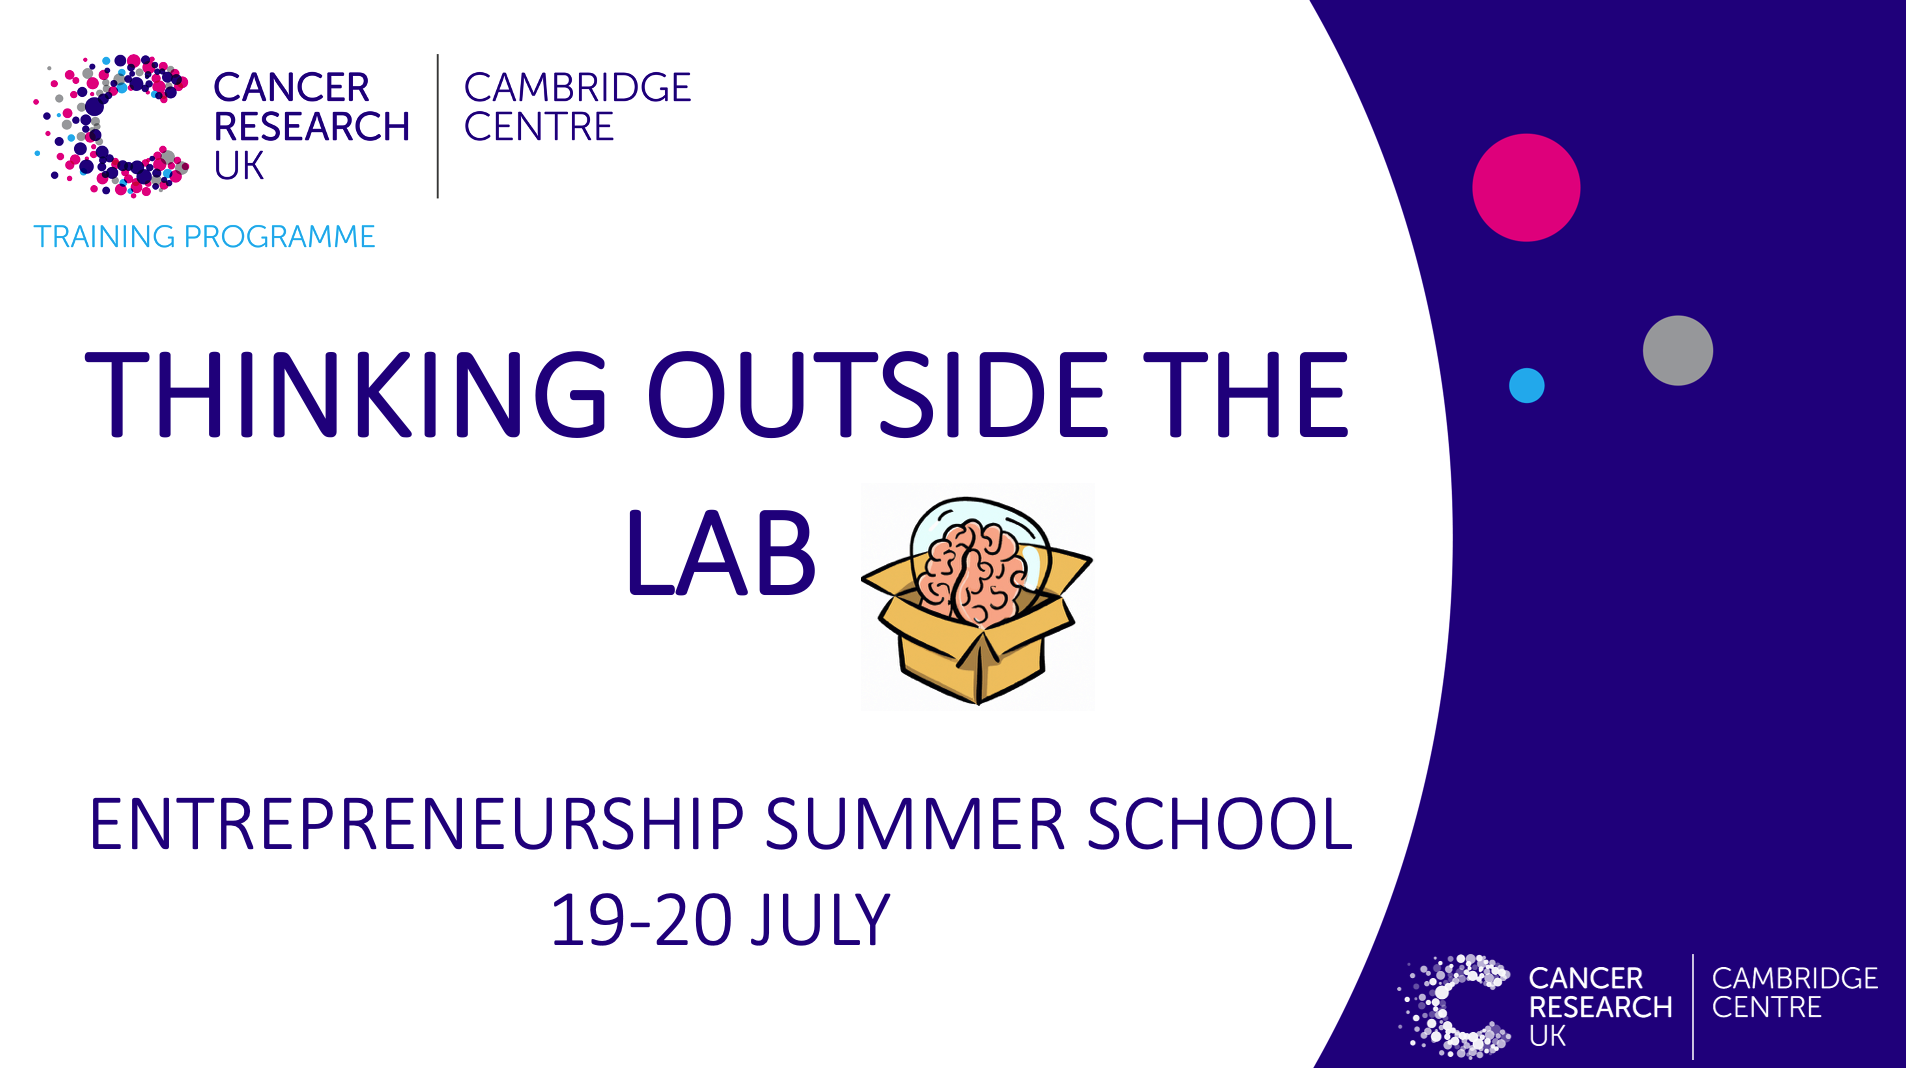 Image with title Thinking outside the lab, Entrepreneurship summer school 2023